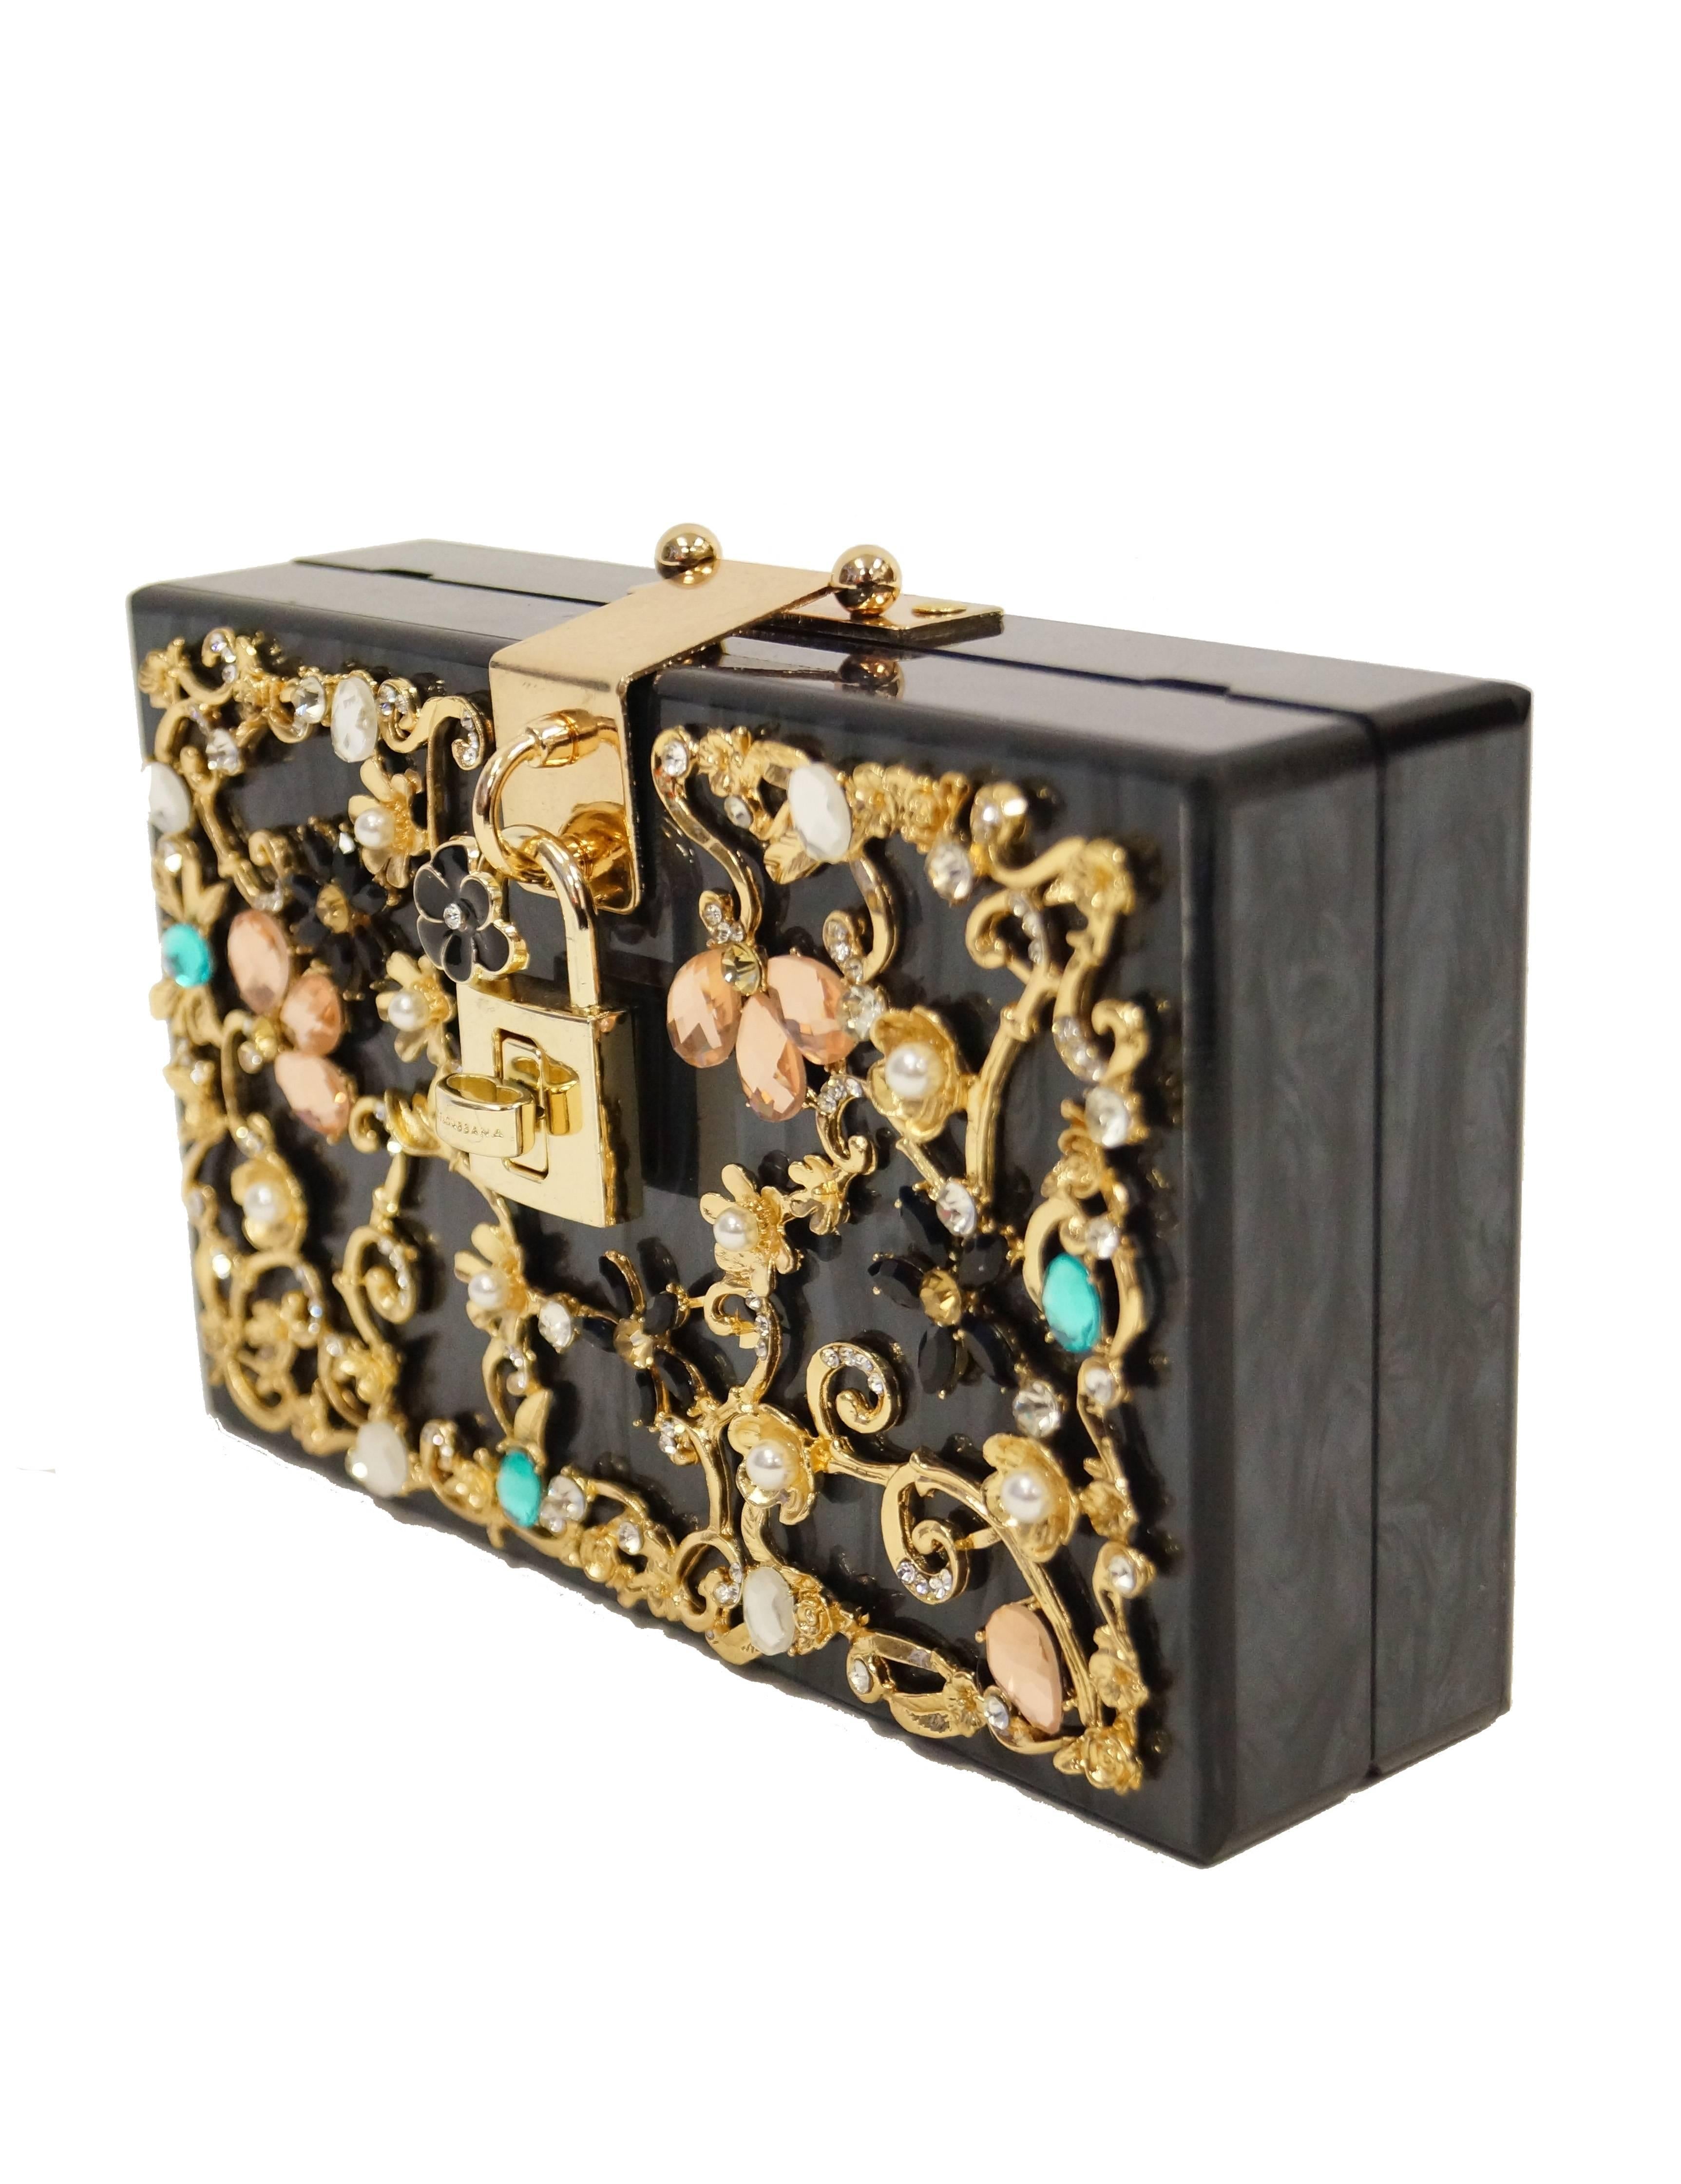 A refreshing new take on the beloved lucite box purse! This Dolce and Gabbana clutch has a rectangular pearlized grey lucite body, featuring gold tone hardware with the Dolce and Gabbana flower lock closure, and floral rhinestone designs on the